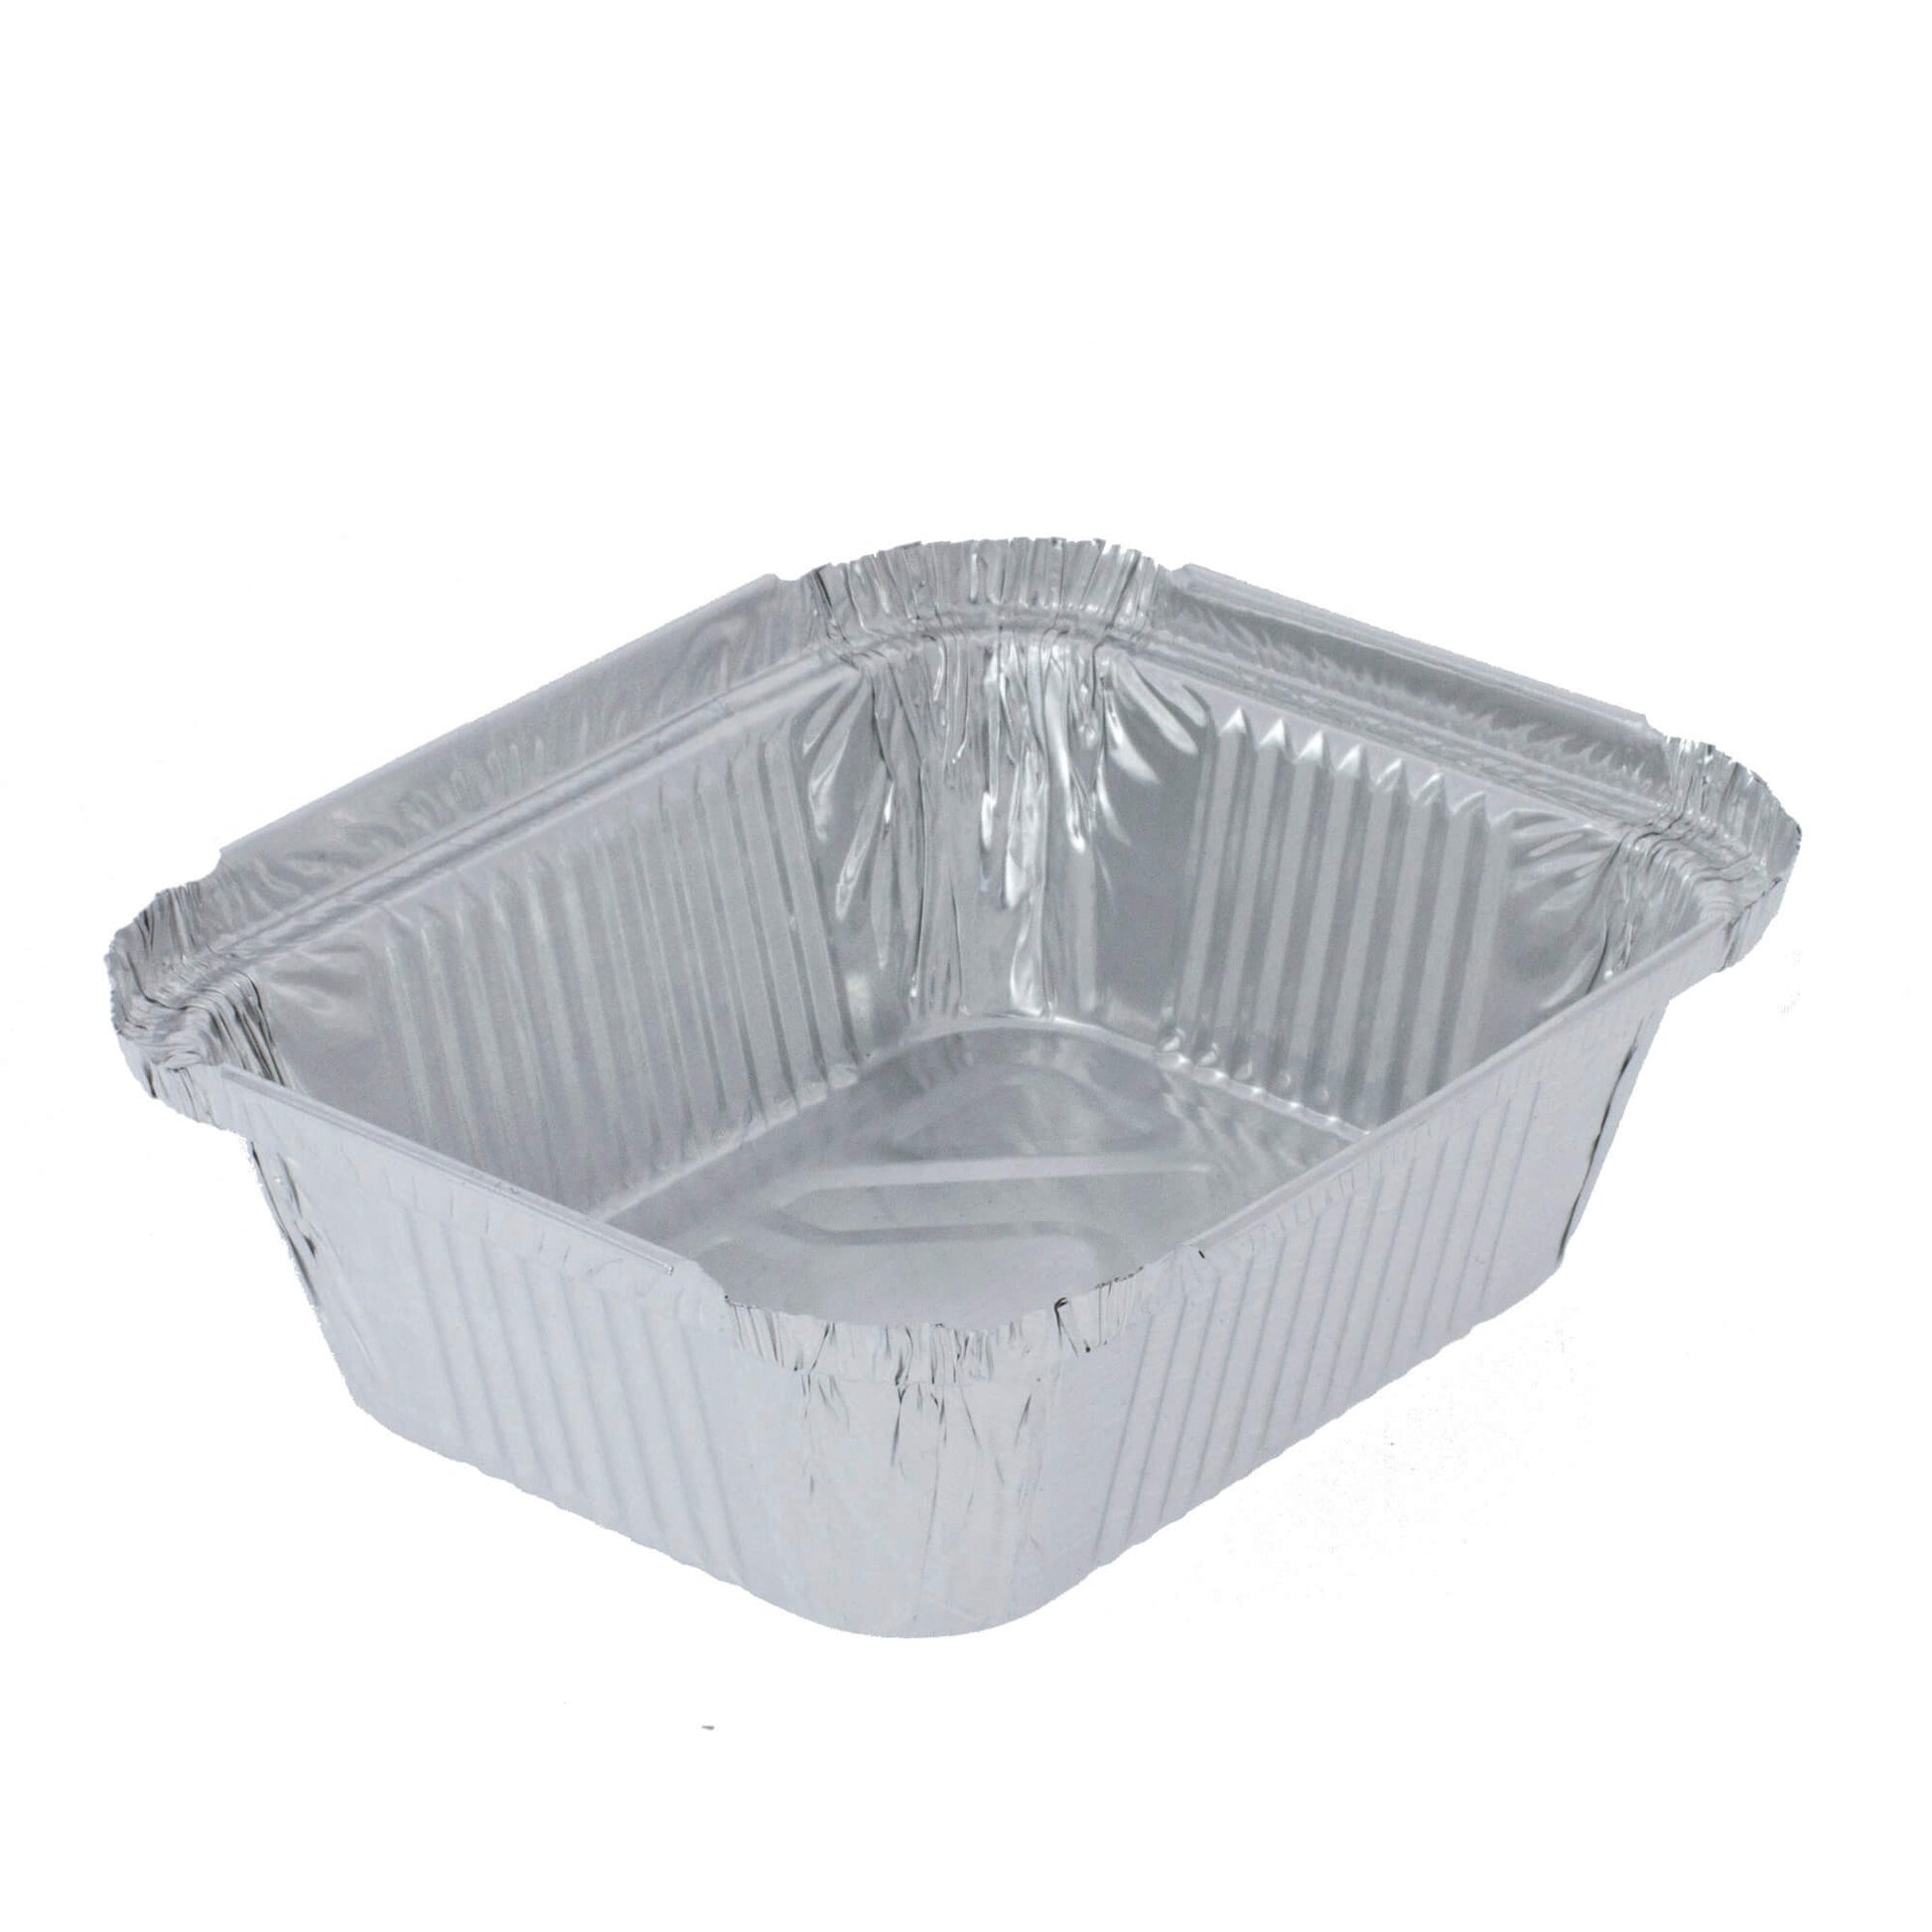 No. 1 Aluminium Foil Food Containers Recyclable 1000pk (Small)